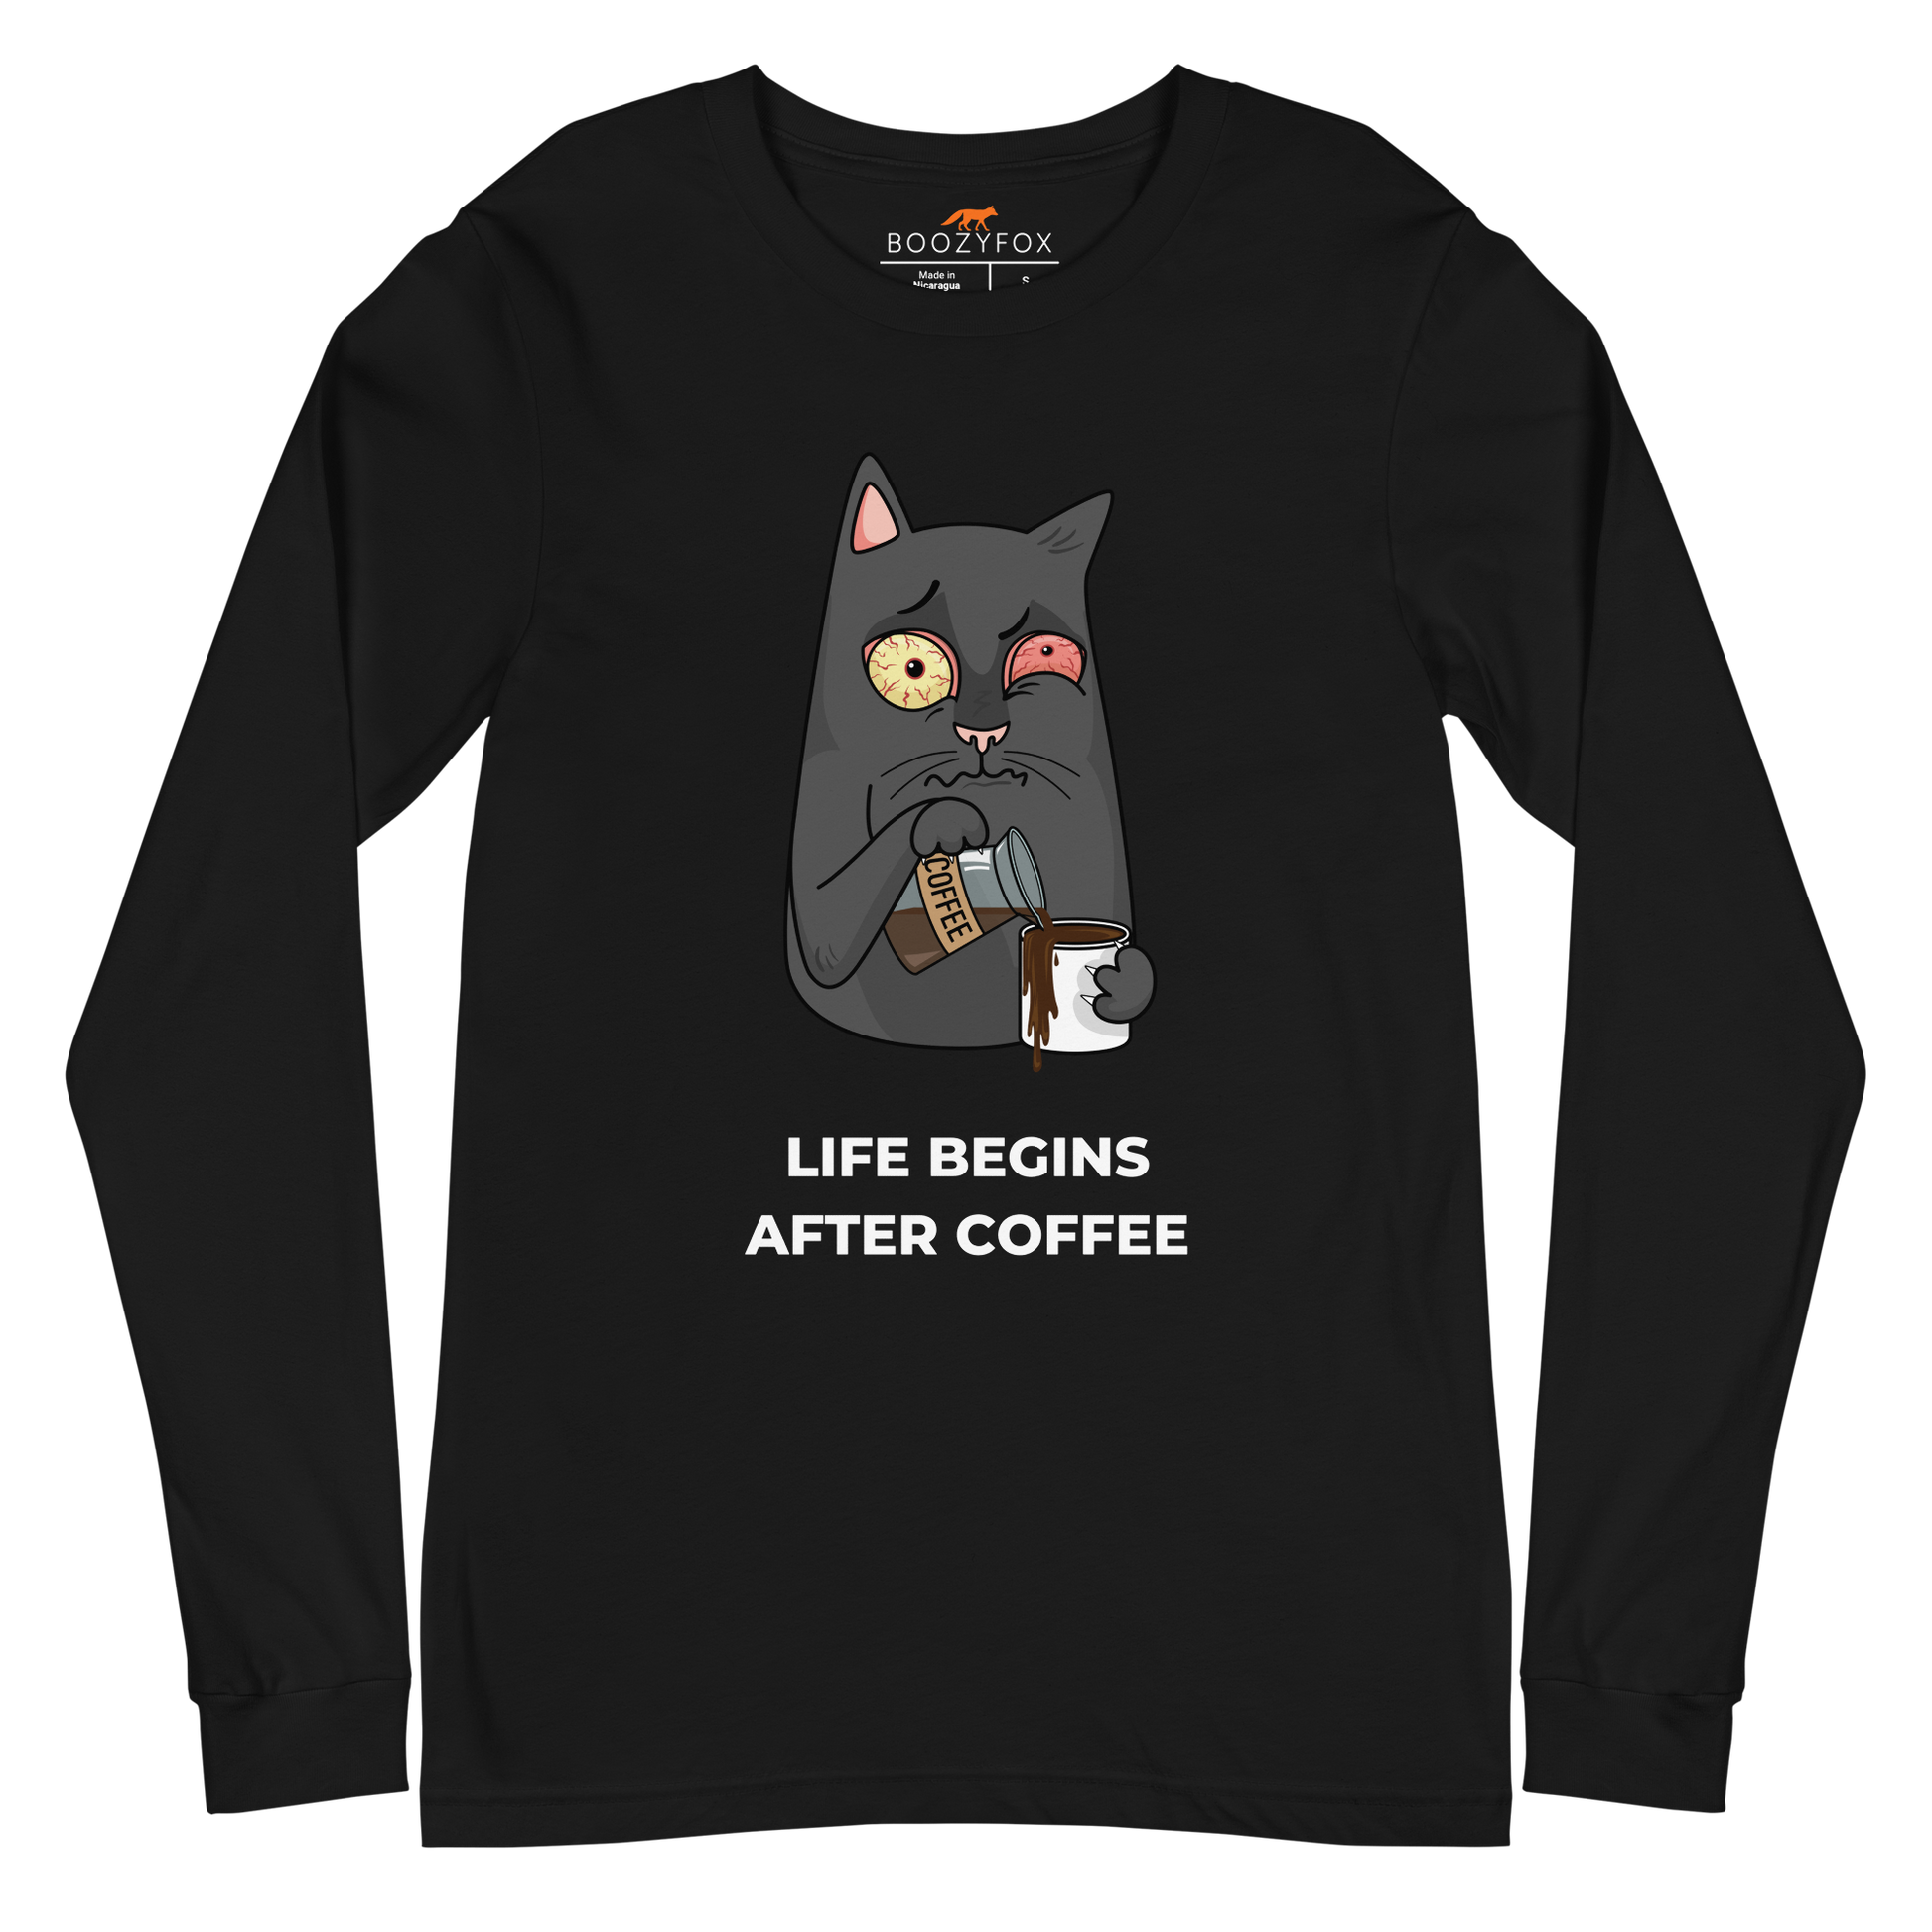 Black Cat Long Sleeve Tee featuring a hilarious Life Begins After Coffee graphic on the chest - Funny Cat Long Sleeve Graphic Tees - Boozy Fox